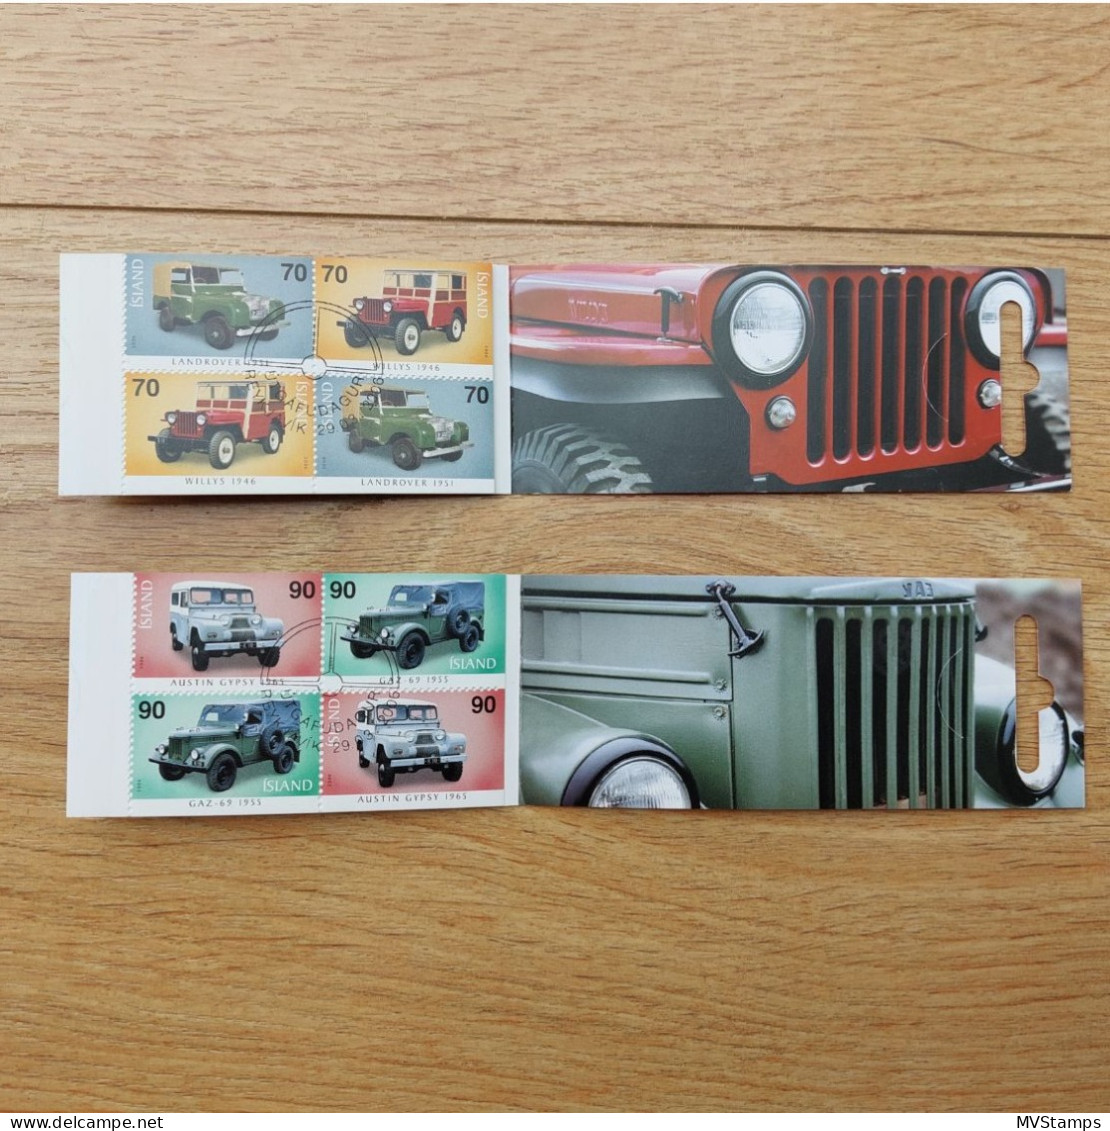 Iceland 2006 Set Stampbooklets Auto's/Cars Stamps (Michel MH 22/23) Used - Carnets